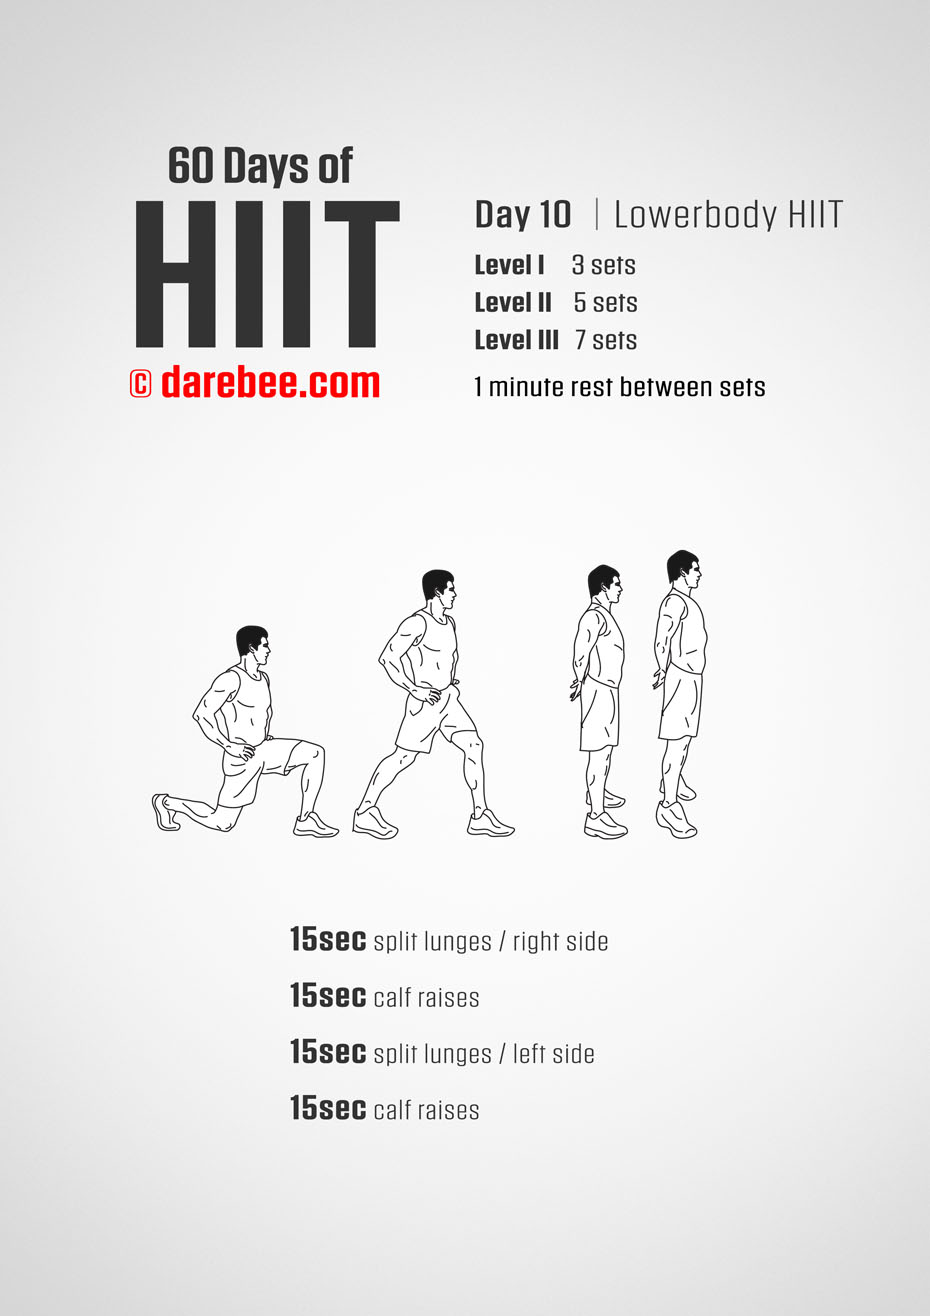 60 Days of HIIT by DAREBEE